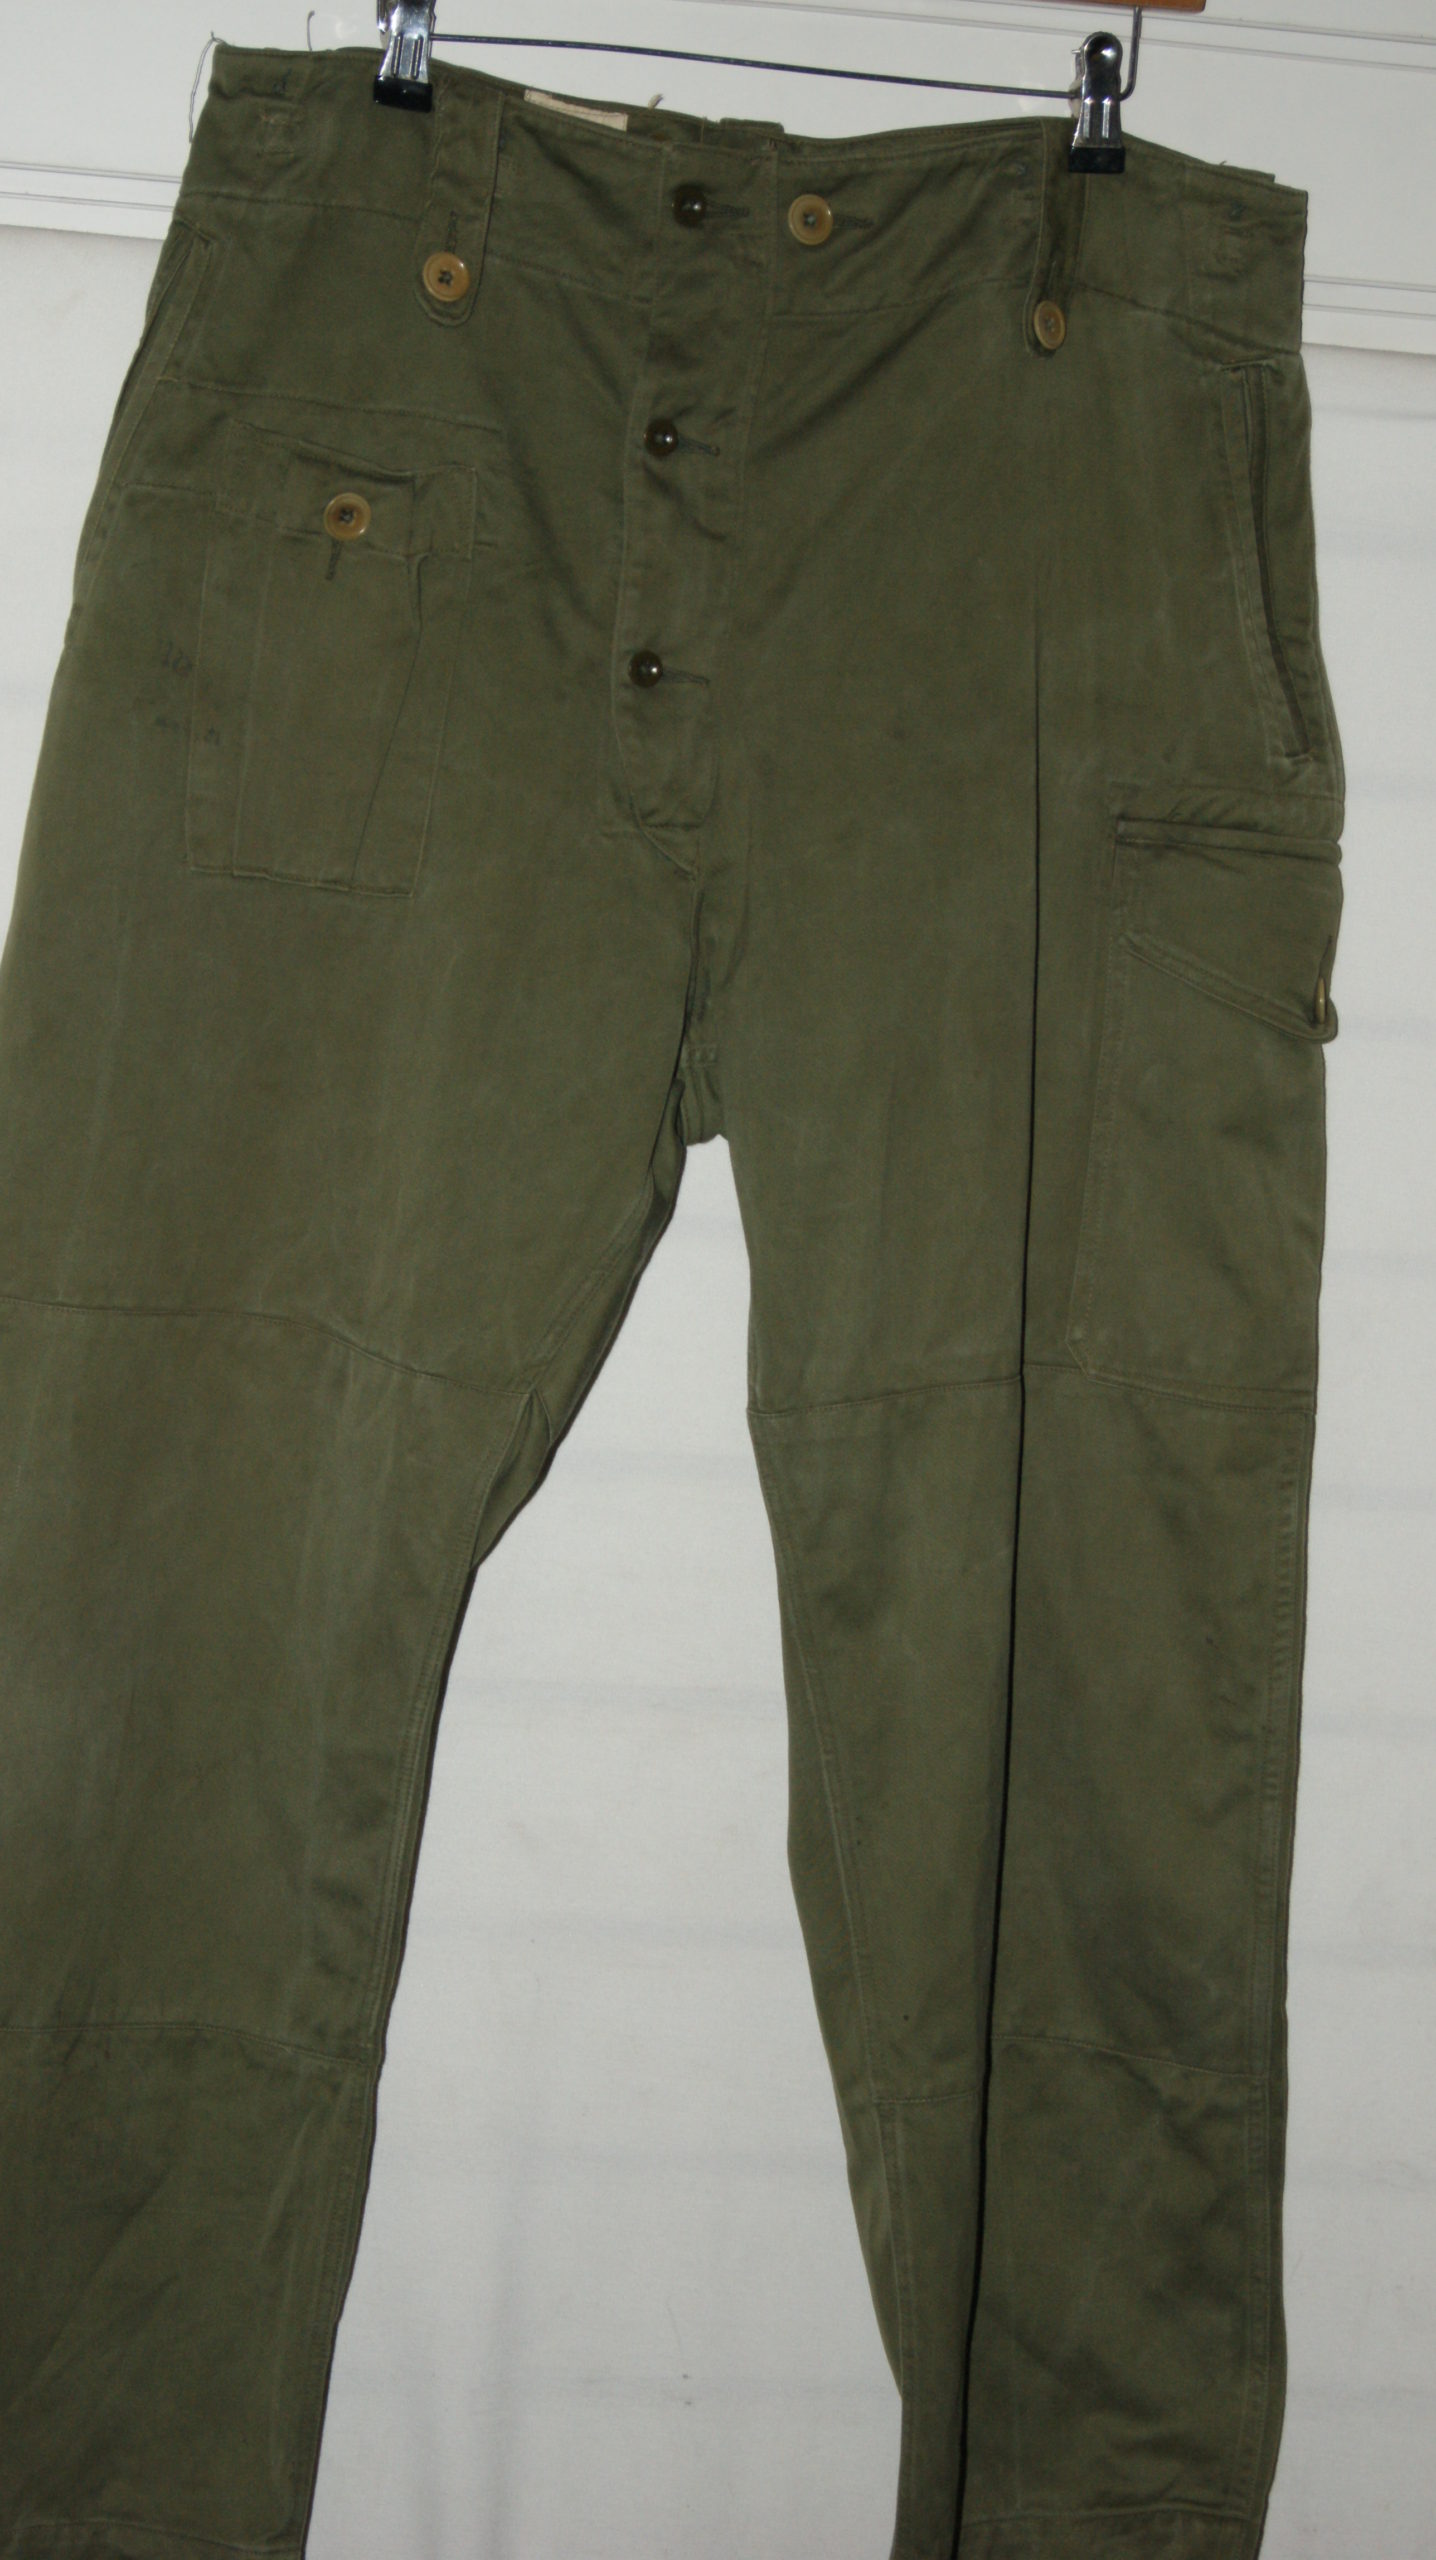 Army Clothing Archives - Army Shop